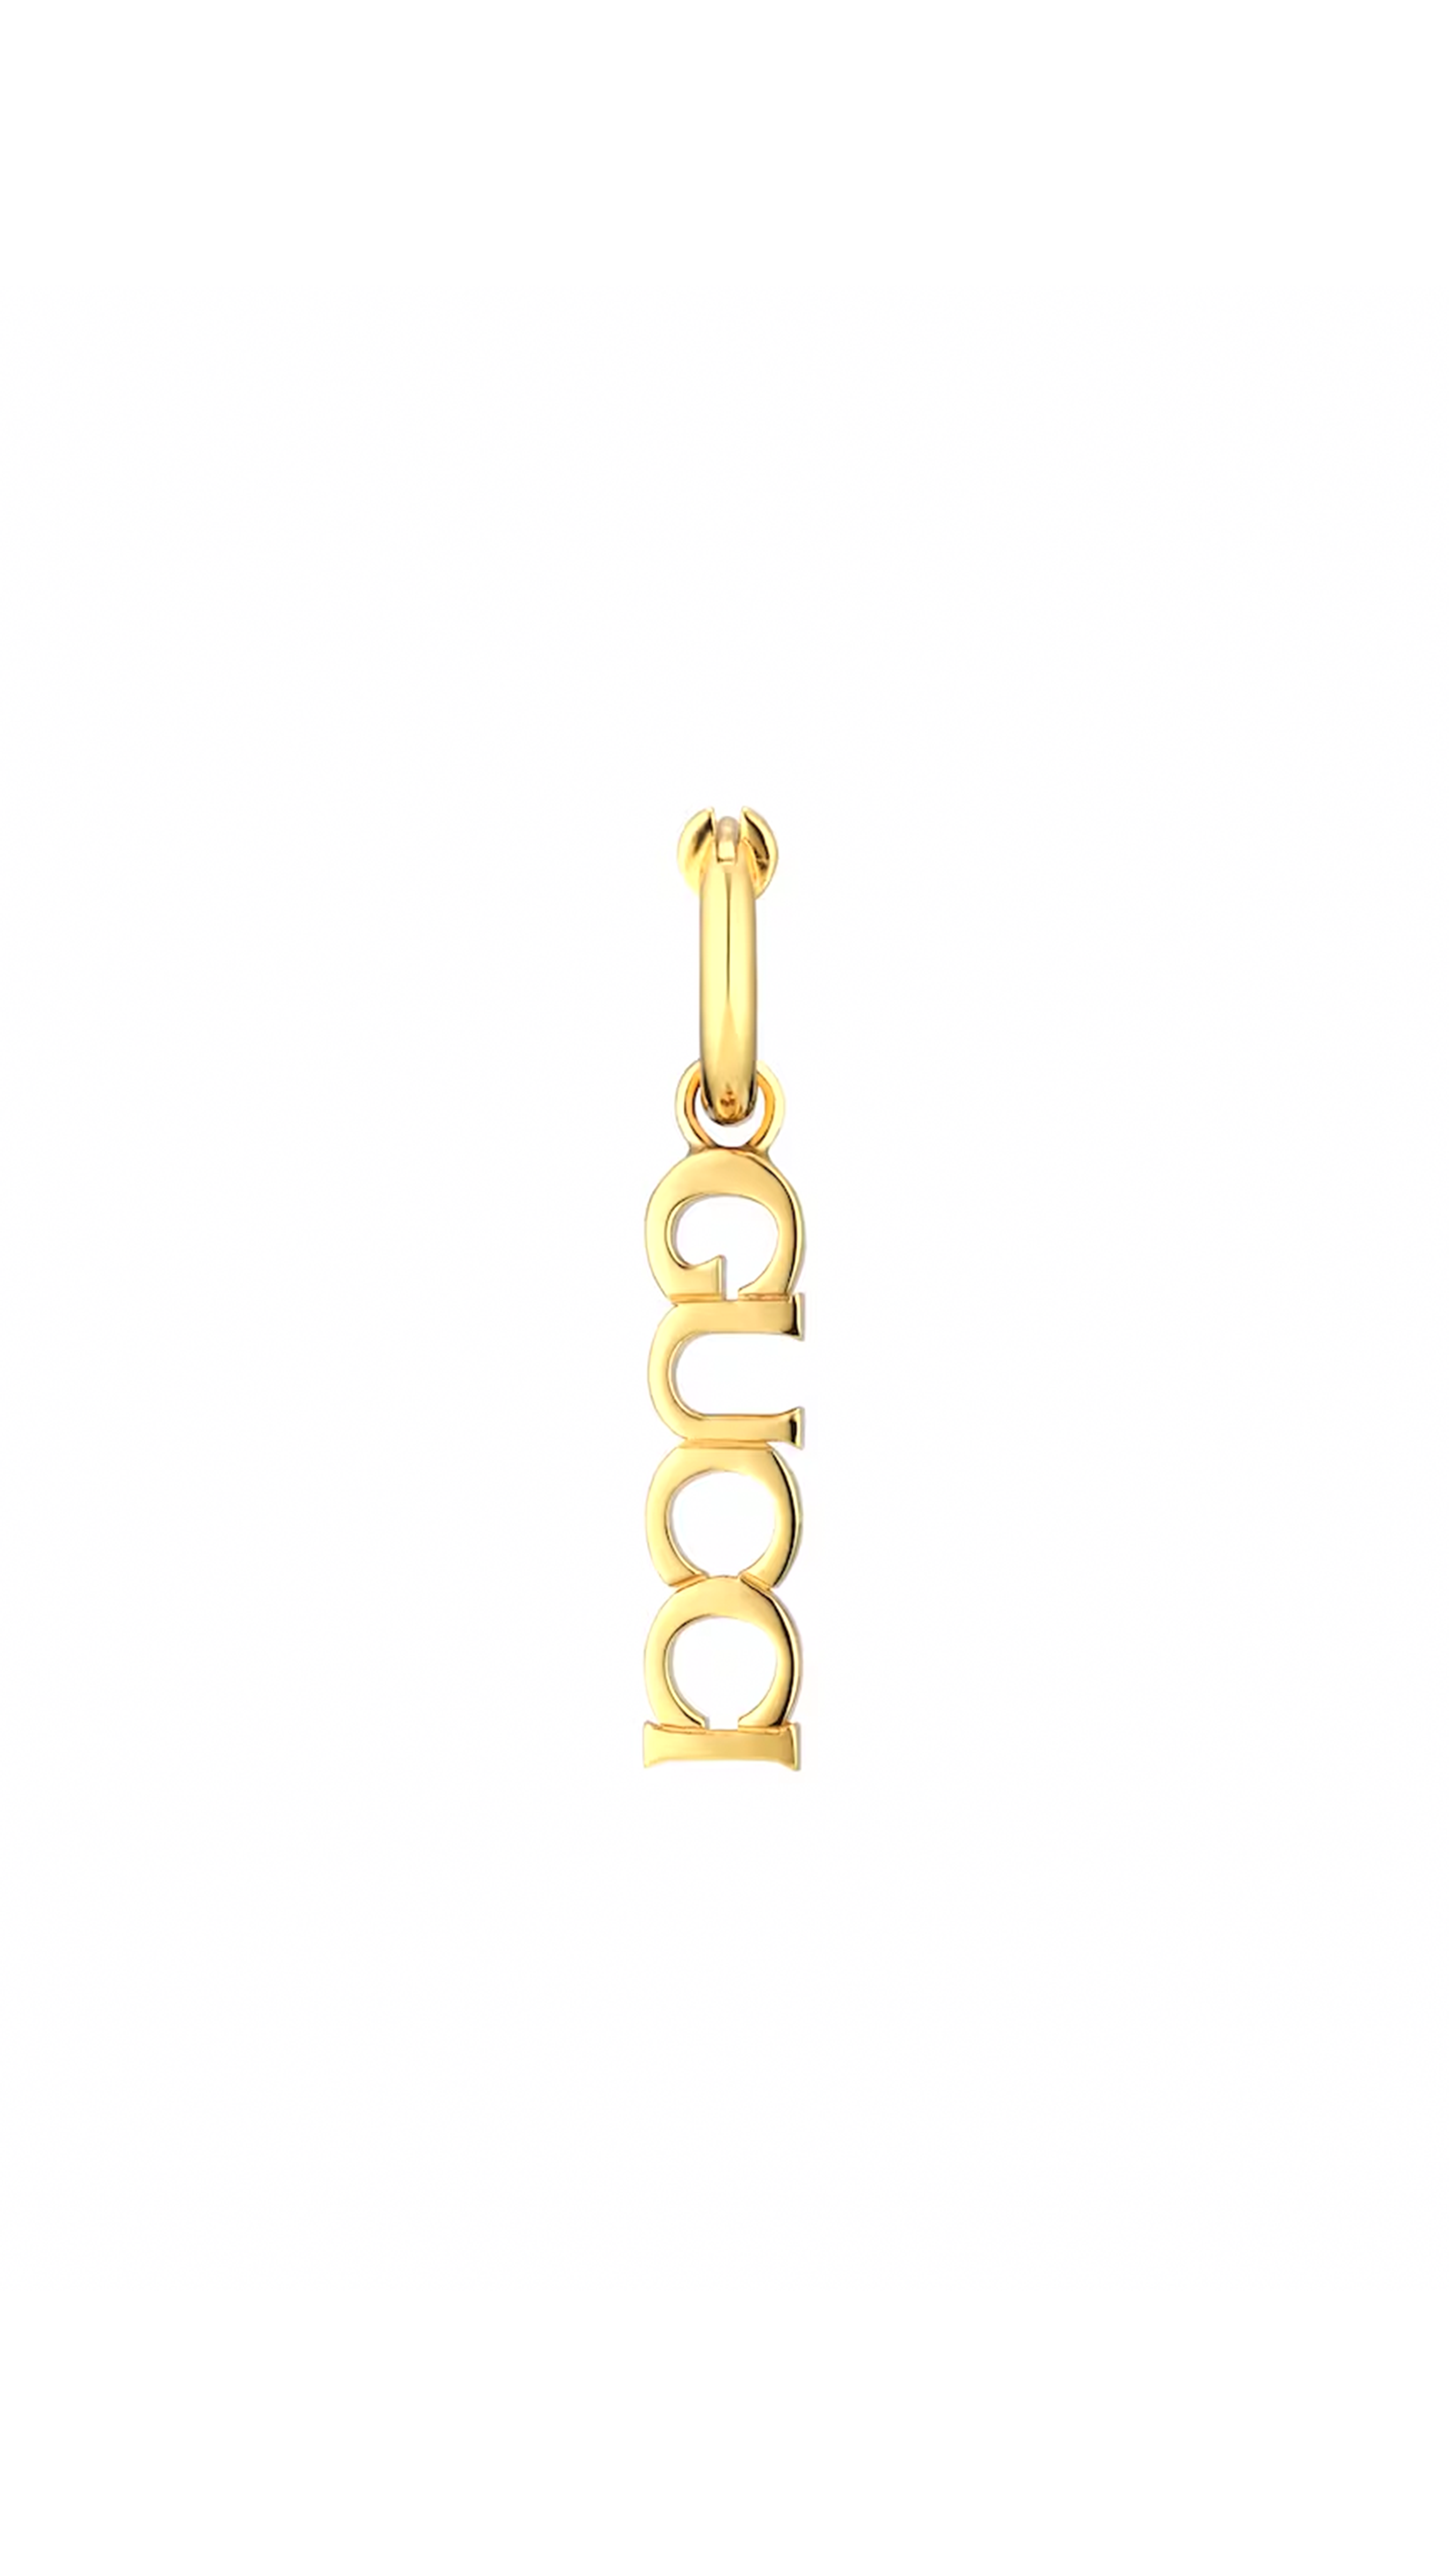 'Gucci' Letter Single Earring - Gold